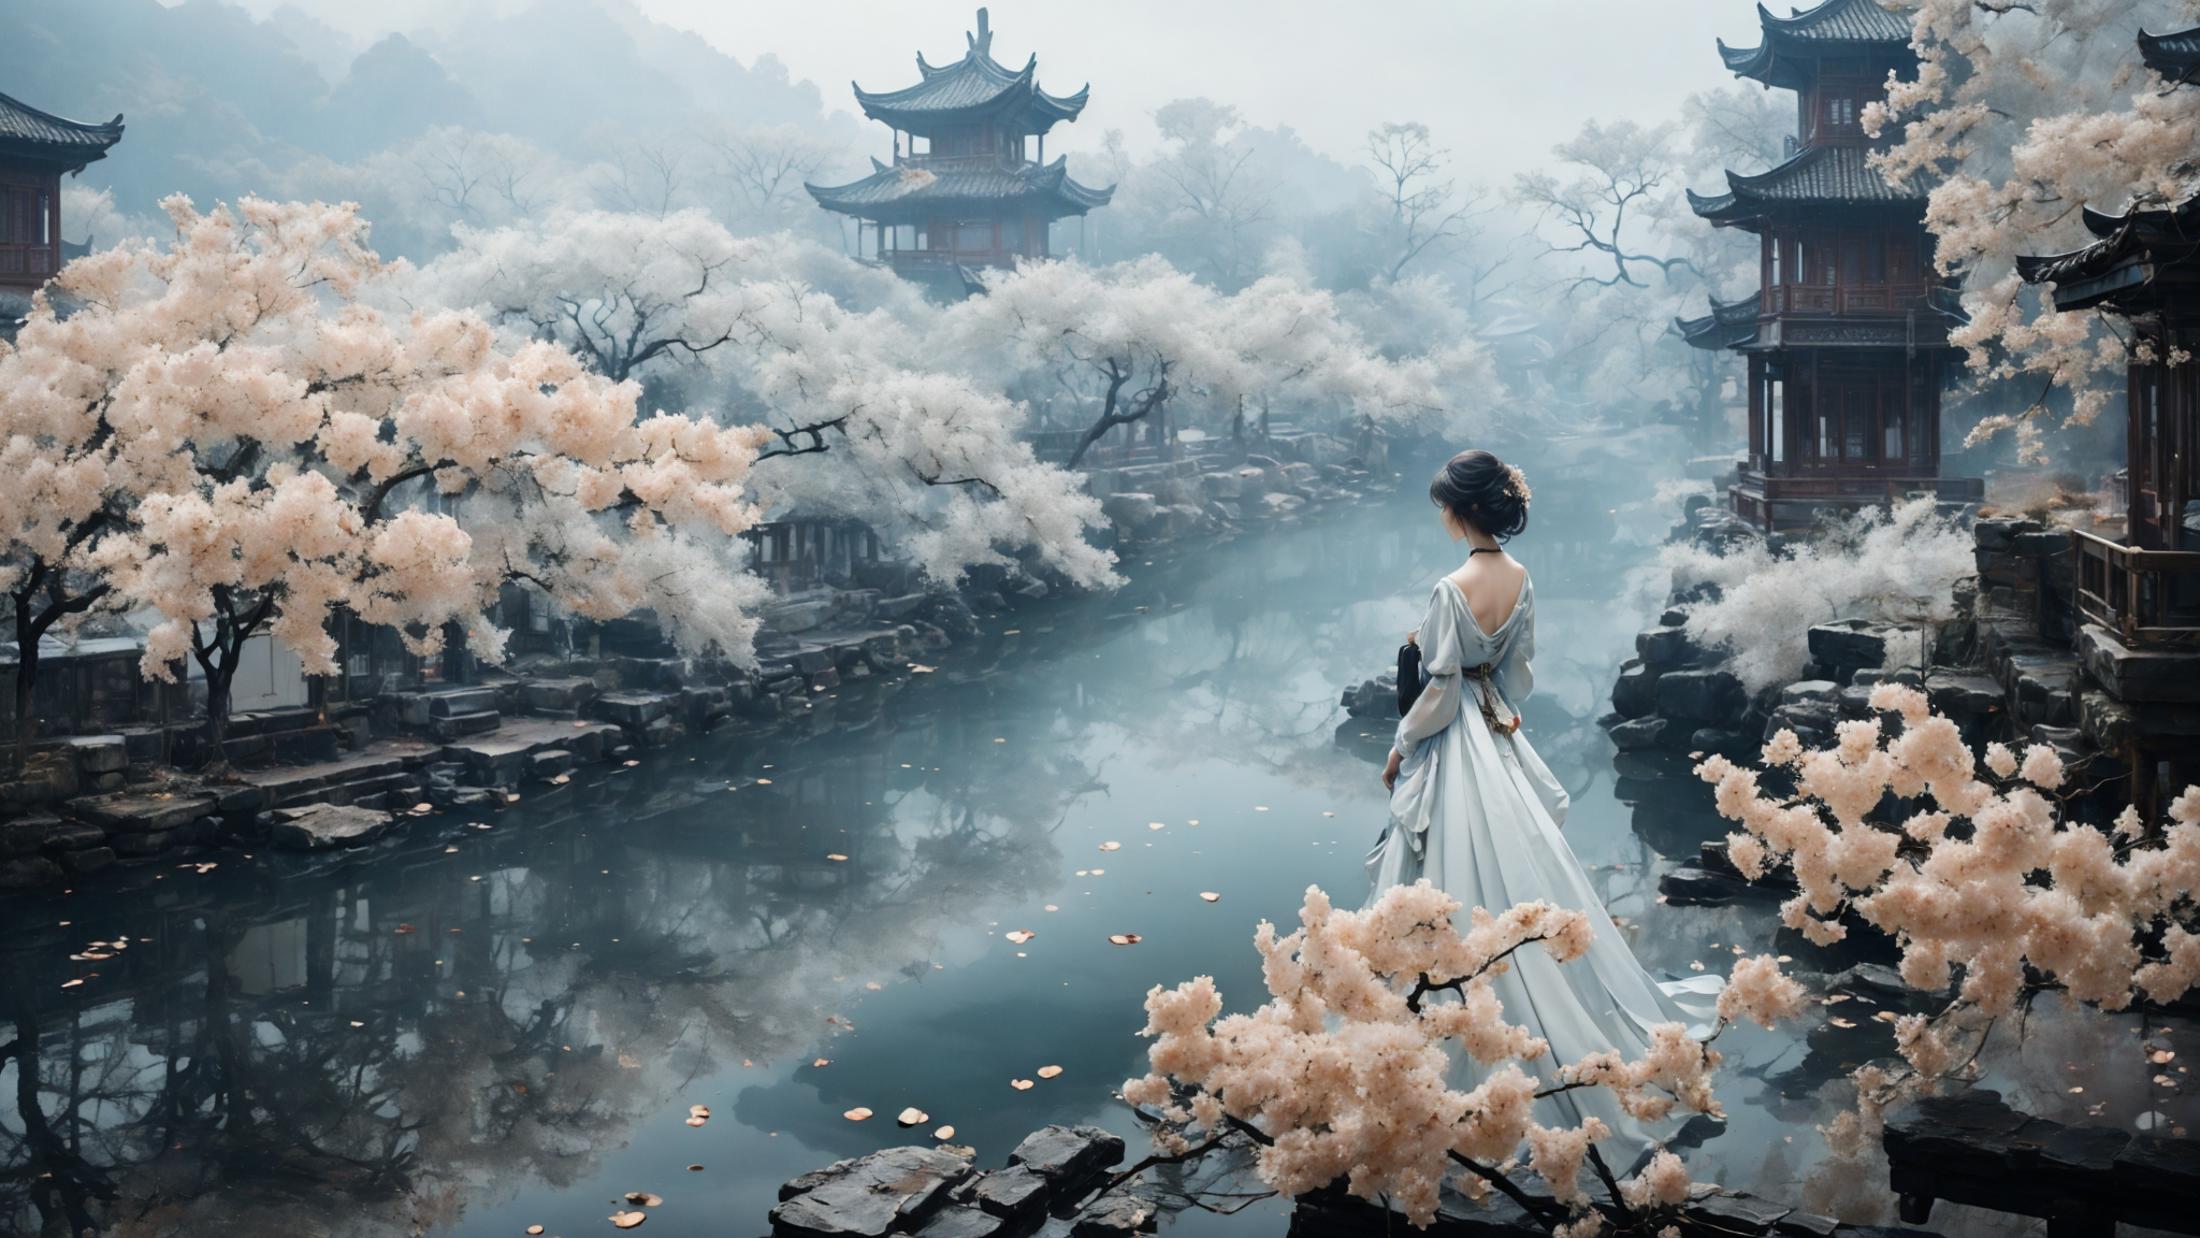 A woman in a white dress stands near a river in a foggy, Asian-inspired setting.